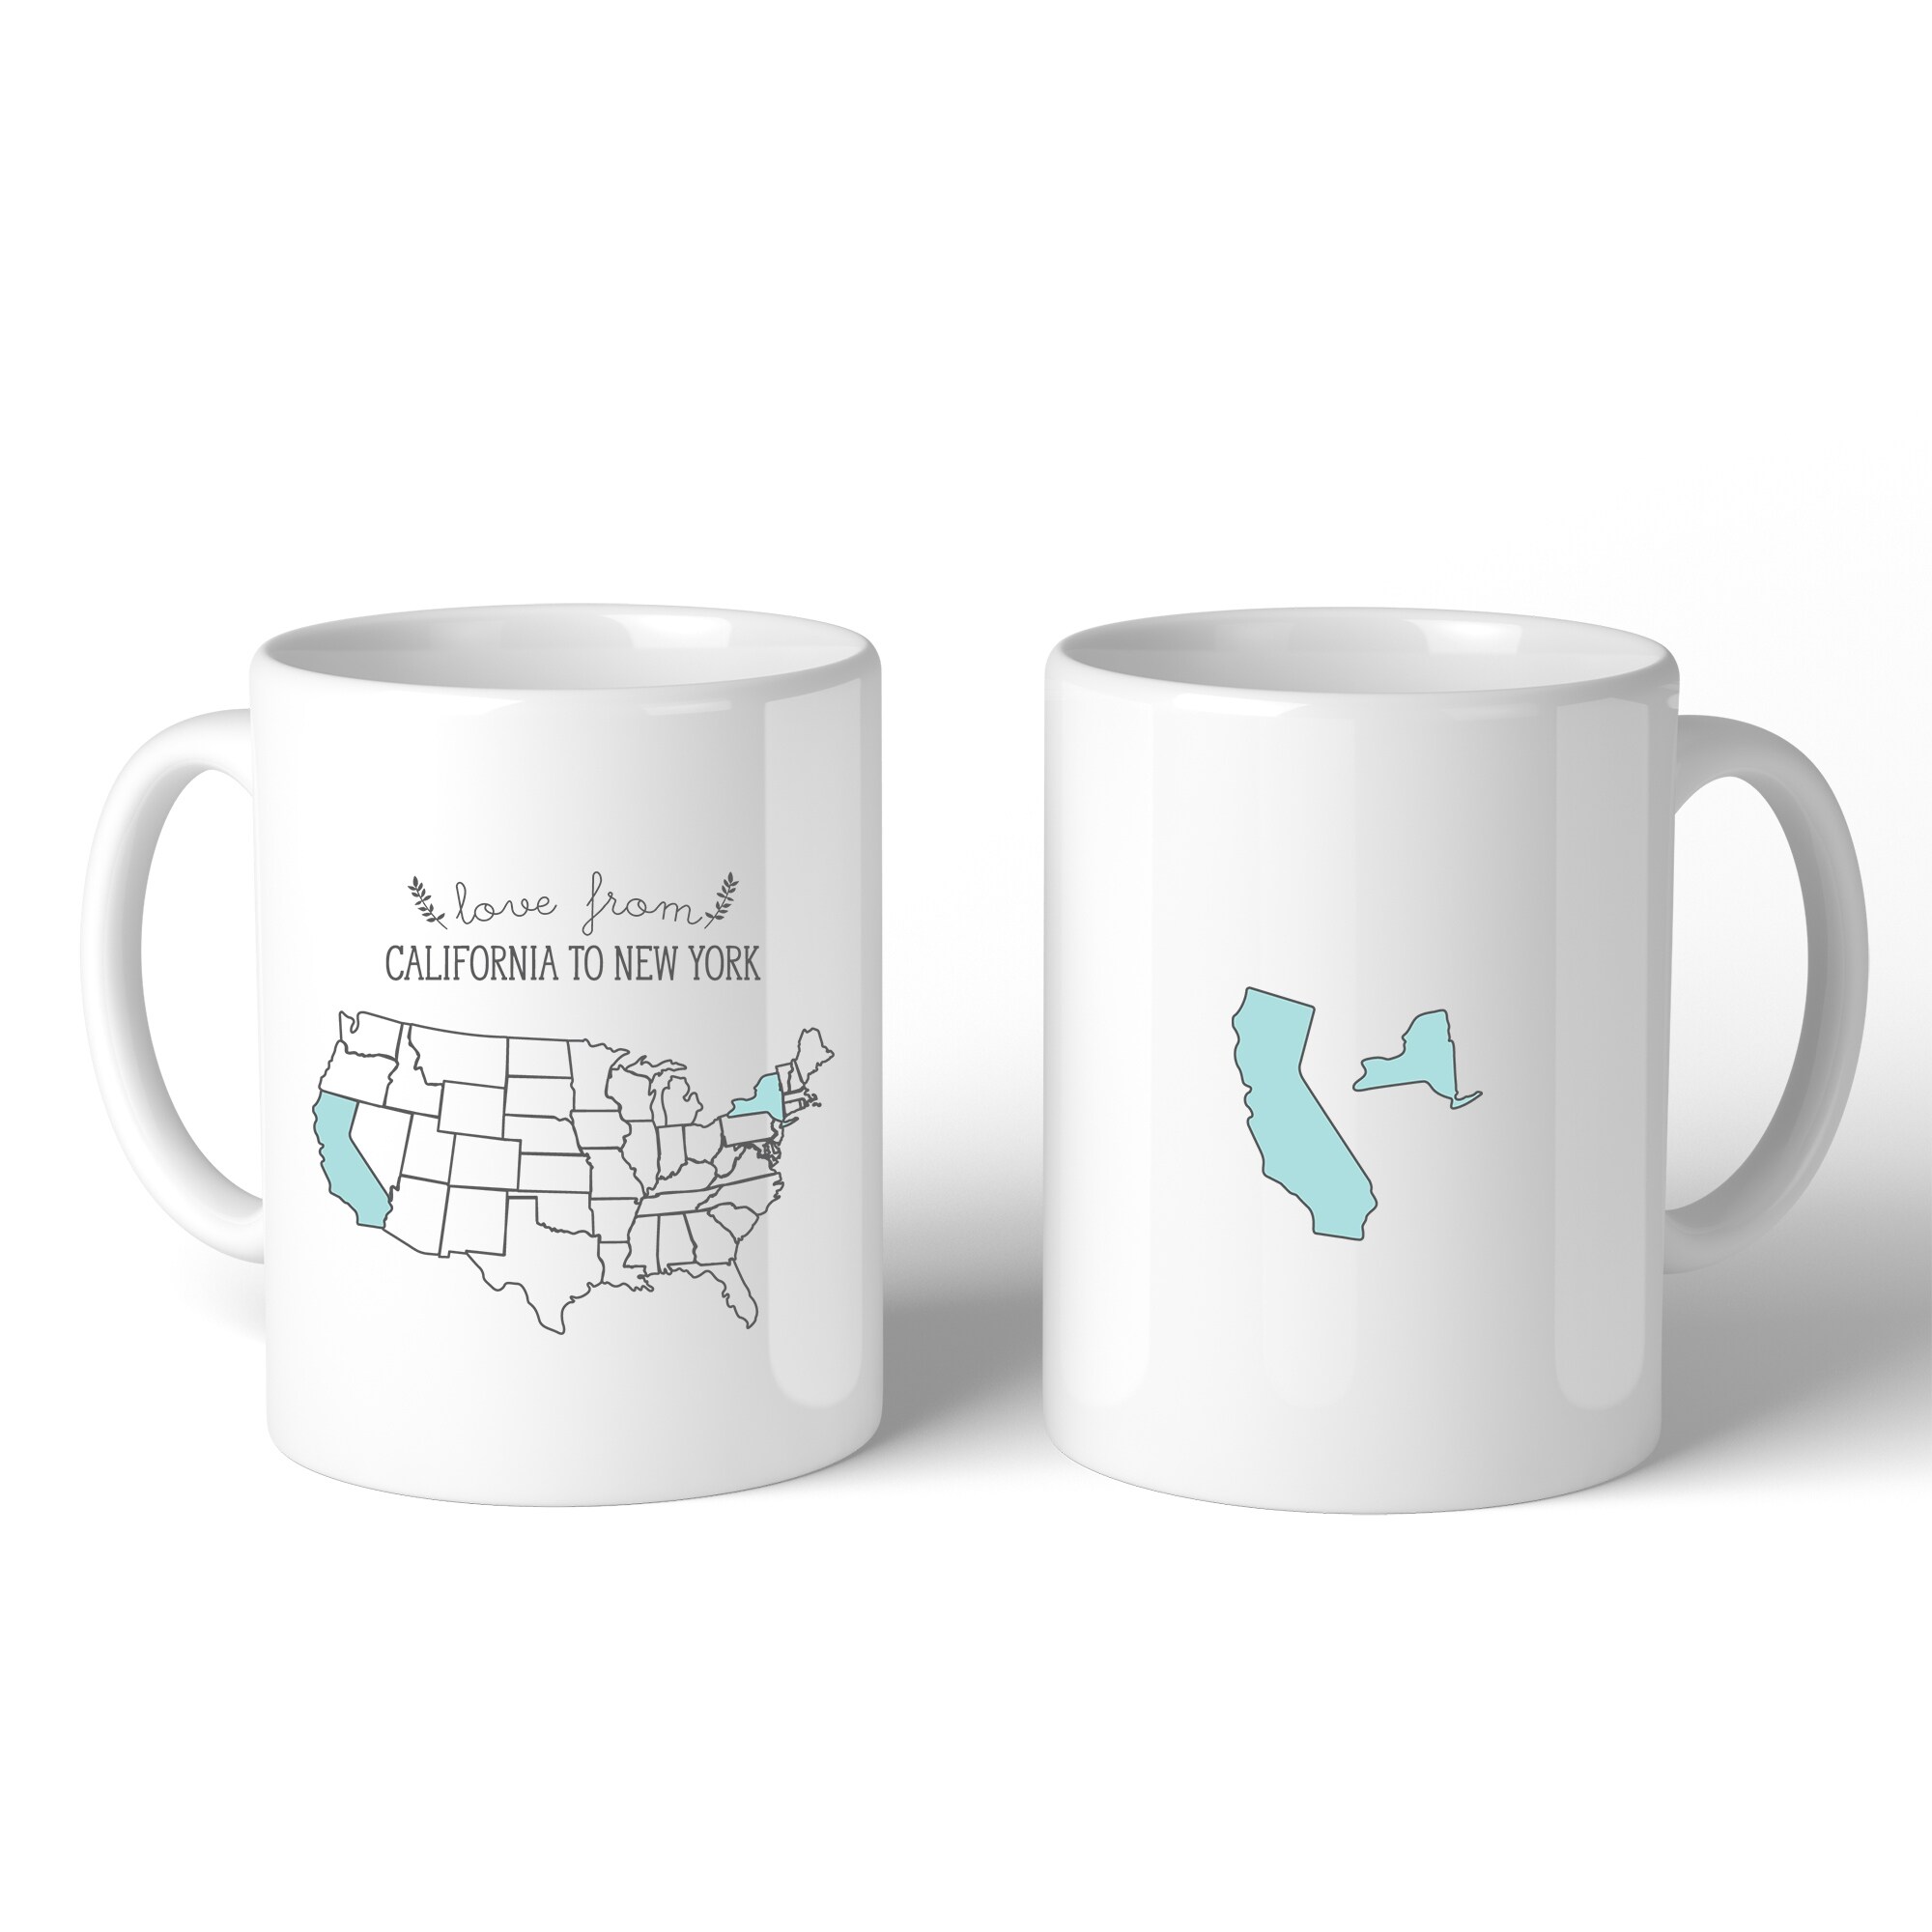 https://ak1.ostkcdn.com/images/products/is/images/direct/4e274711b57f9852b6227ad97a880c0817ac21da/Love-From-States-Unique-Customized-Coffee-Mug-Personalized-Gifts.jpg